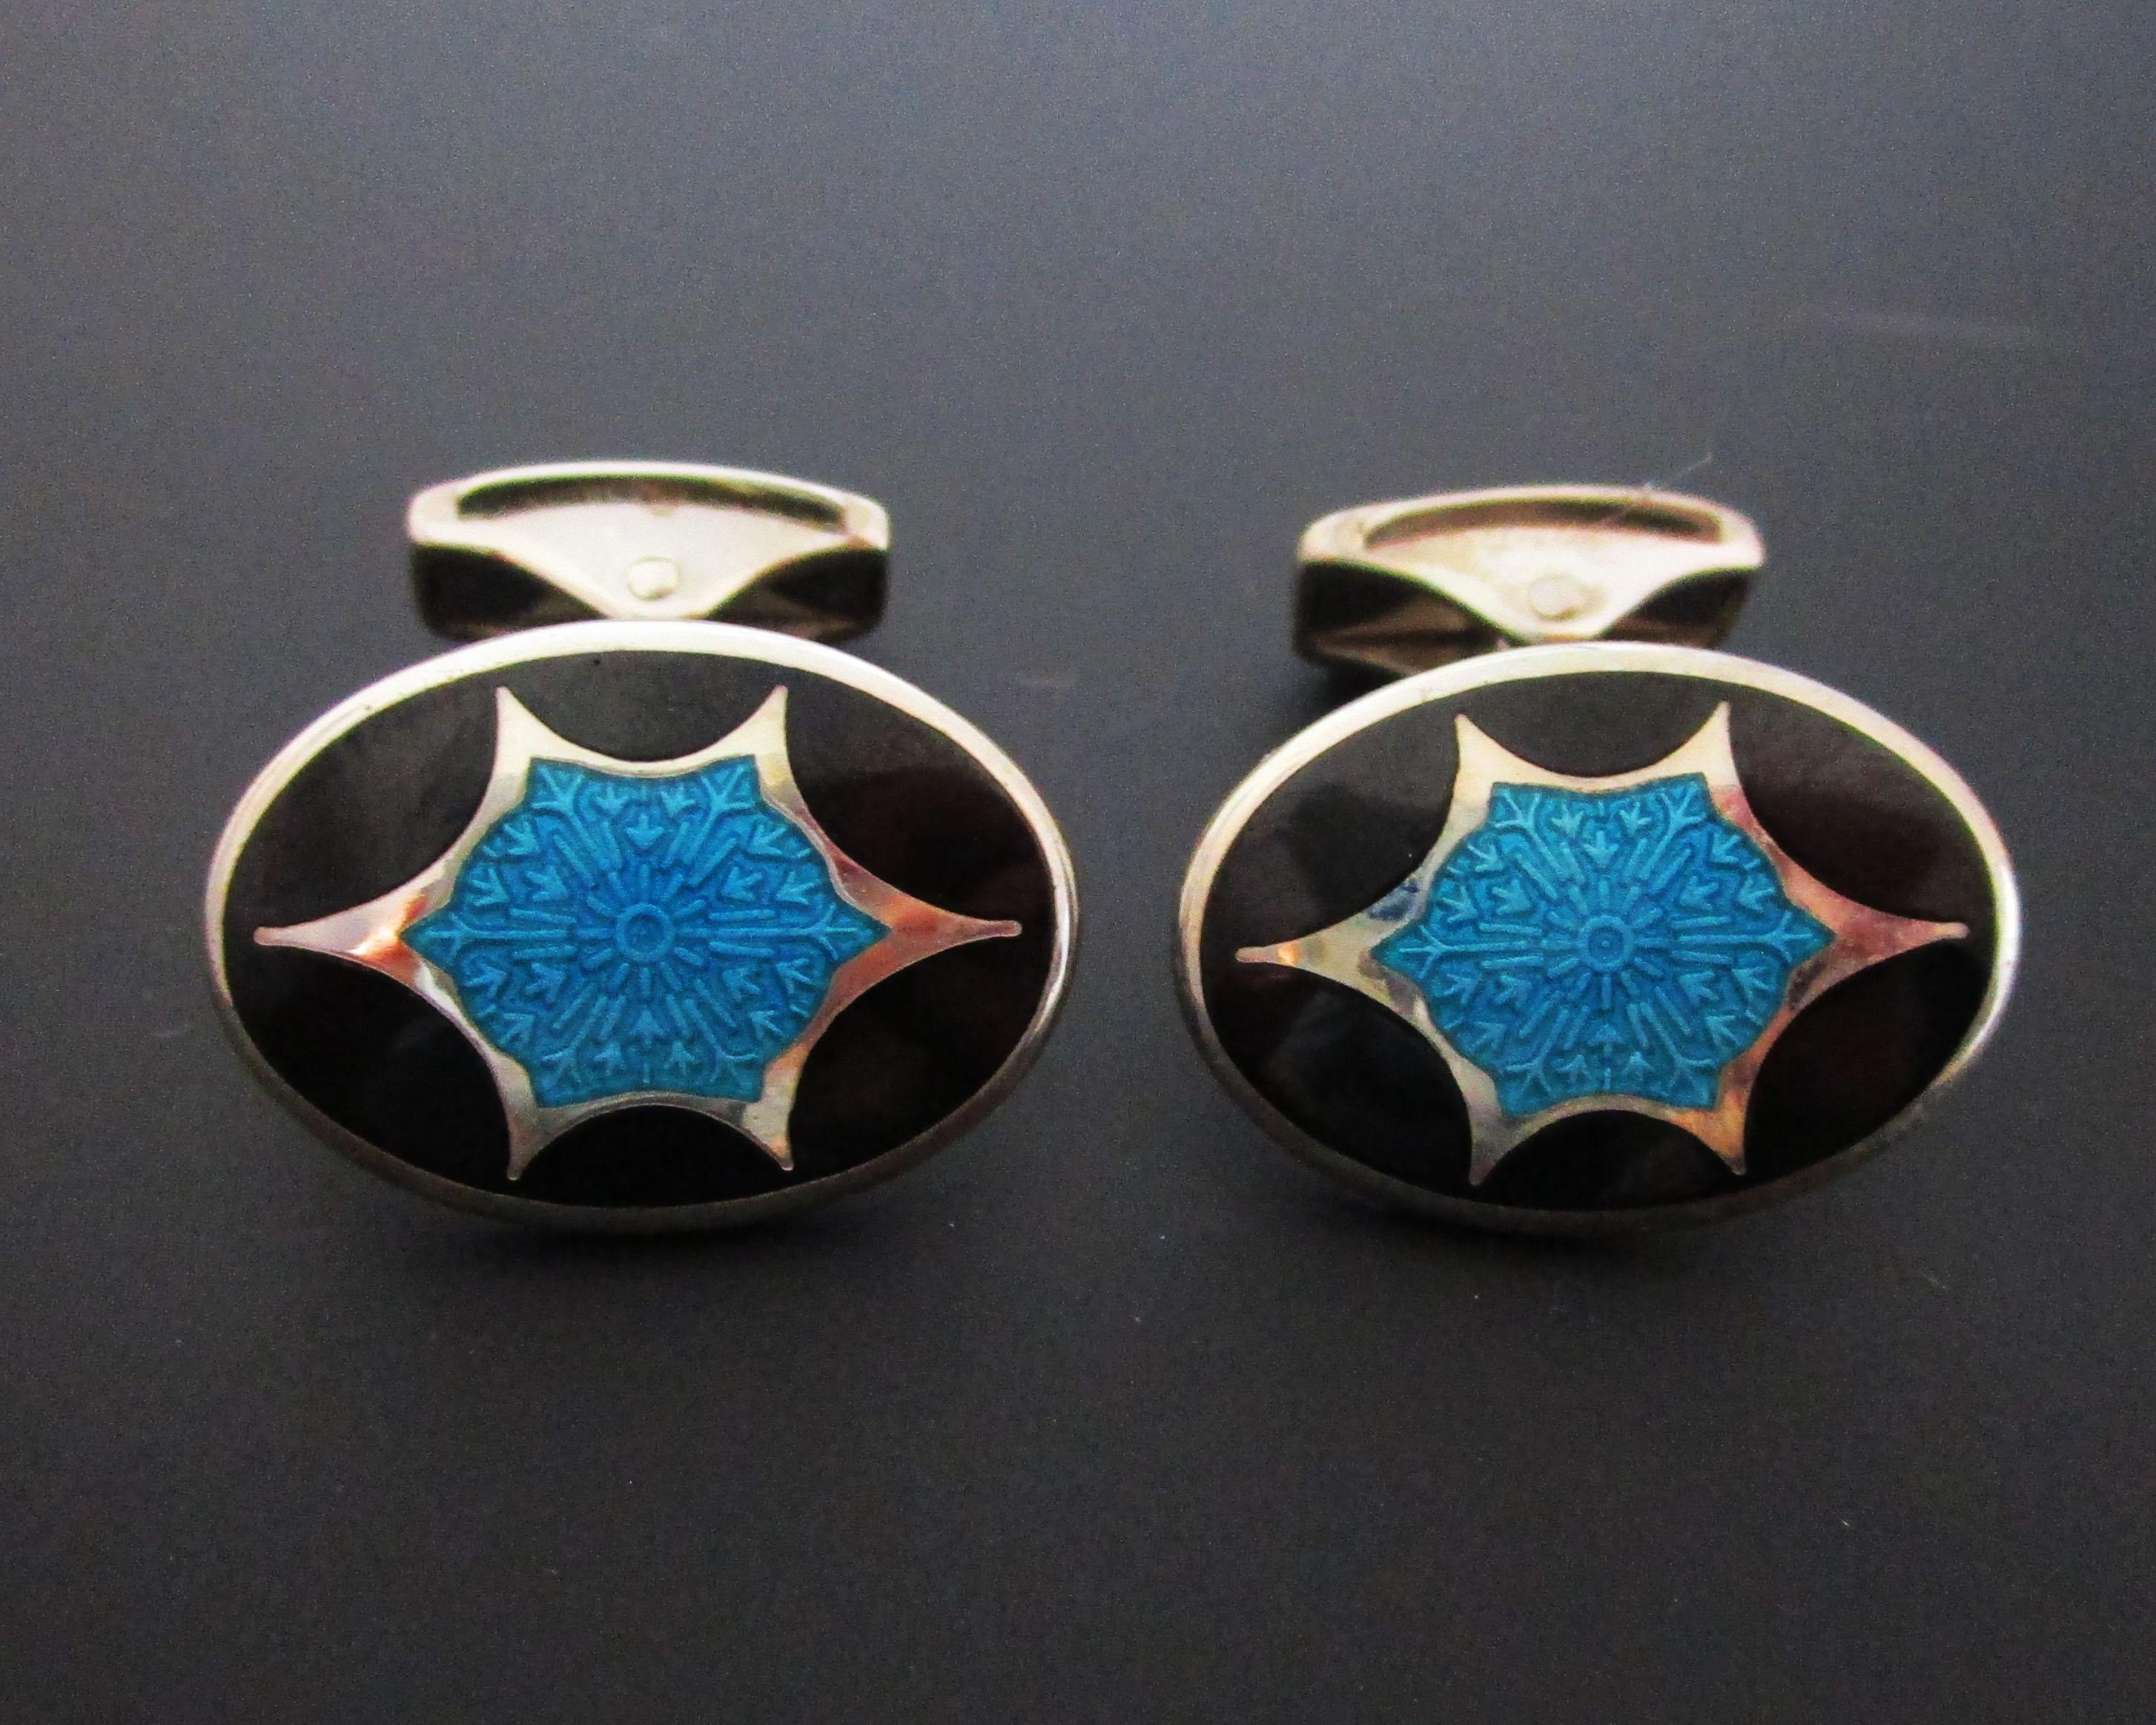 This is a remarkable pair of sterling silver Deco style cufflinks featuring gorgeous turquoise guilloche enamel field and a dramatic opaque black enamel border! The classic oval shape of the links is made unique by the dramatically contrasting